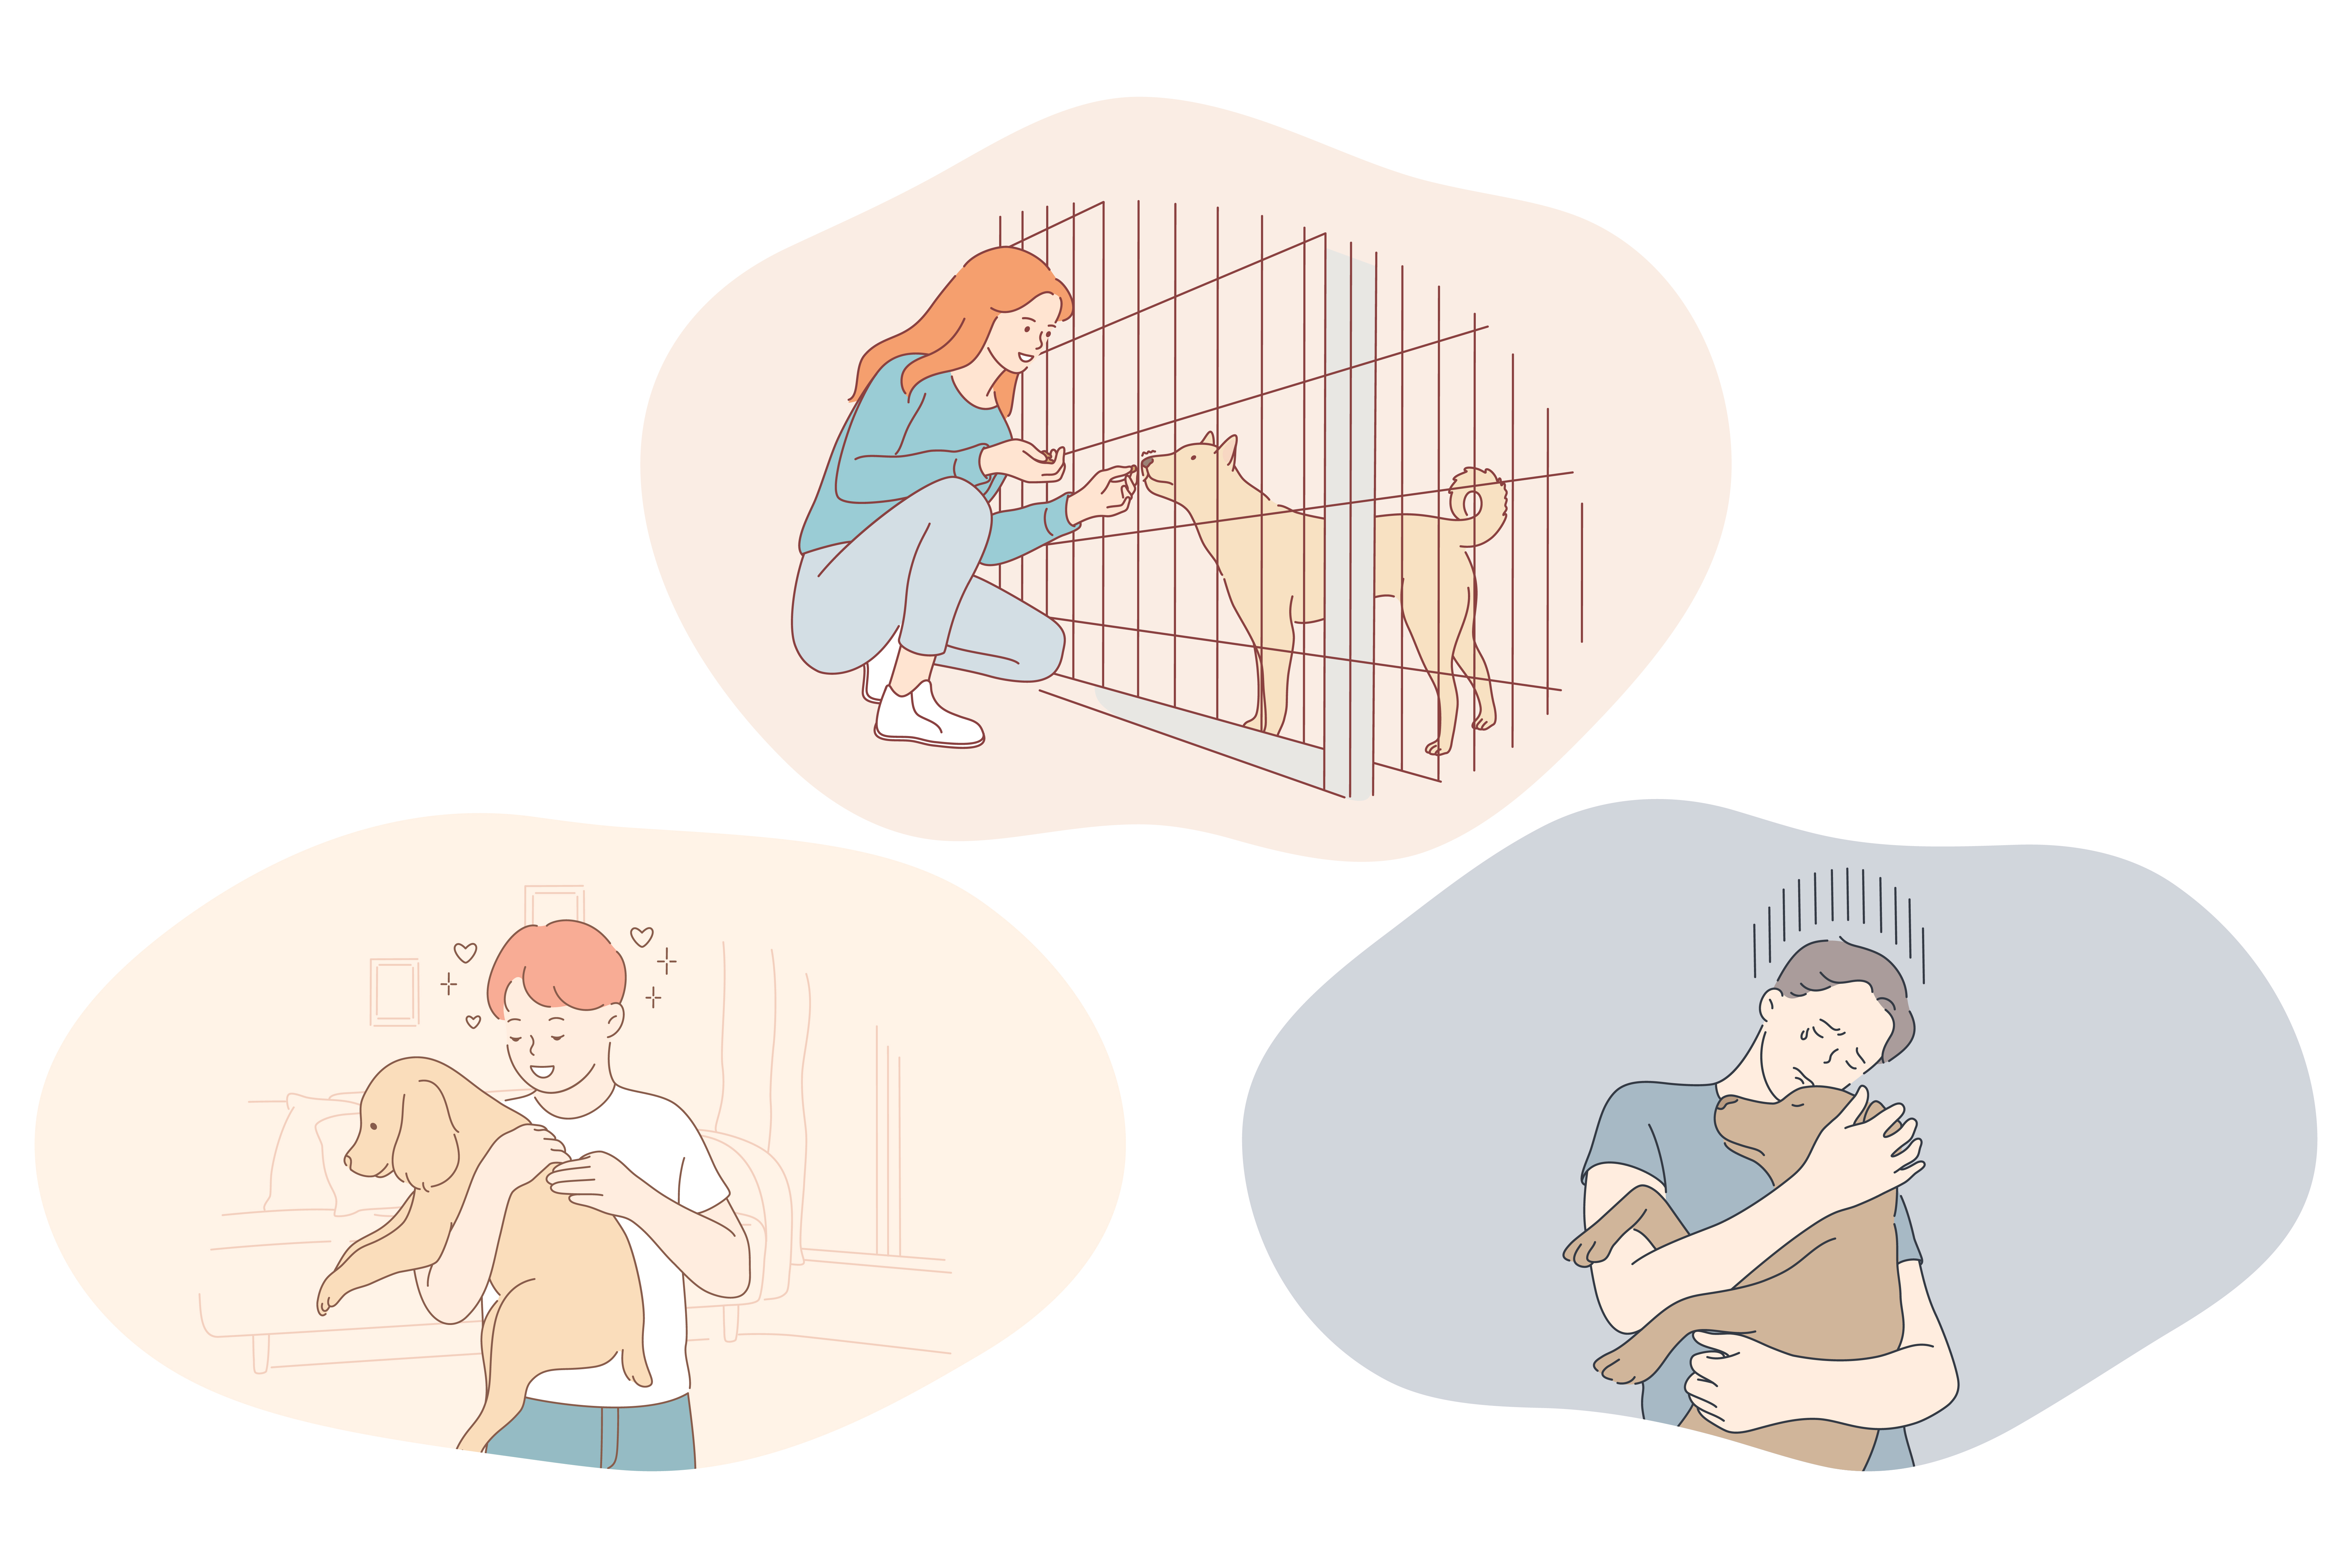 Adoption dogs from shelter, volunteering and helping pets concept. Young boys and girl feeding dogs in shelter cage, holding on hands, hugging and taking care of adopted puppies illustration . Adoption dogs from shelter, volunteering and helping pets concept